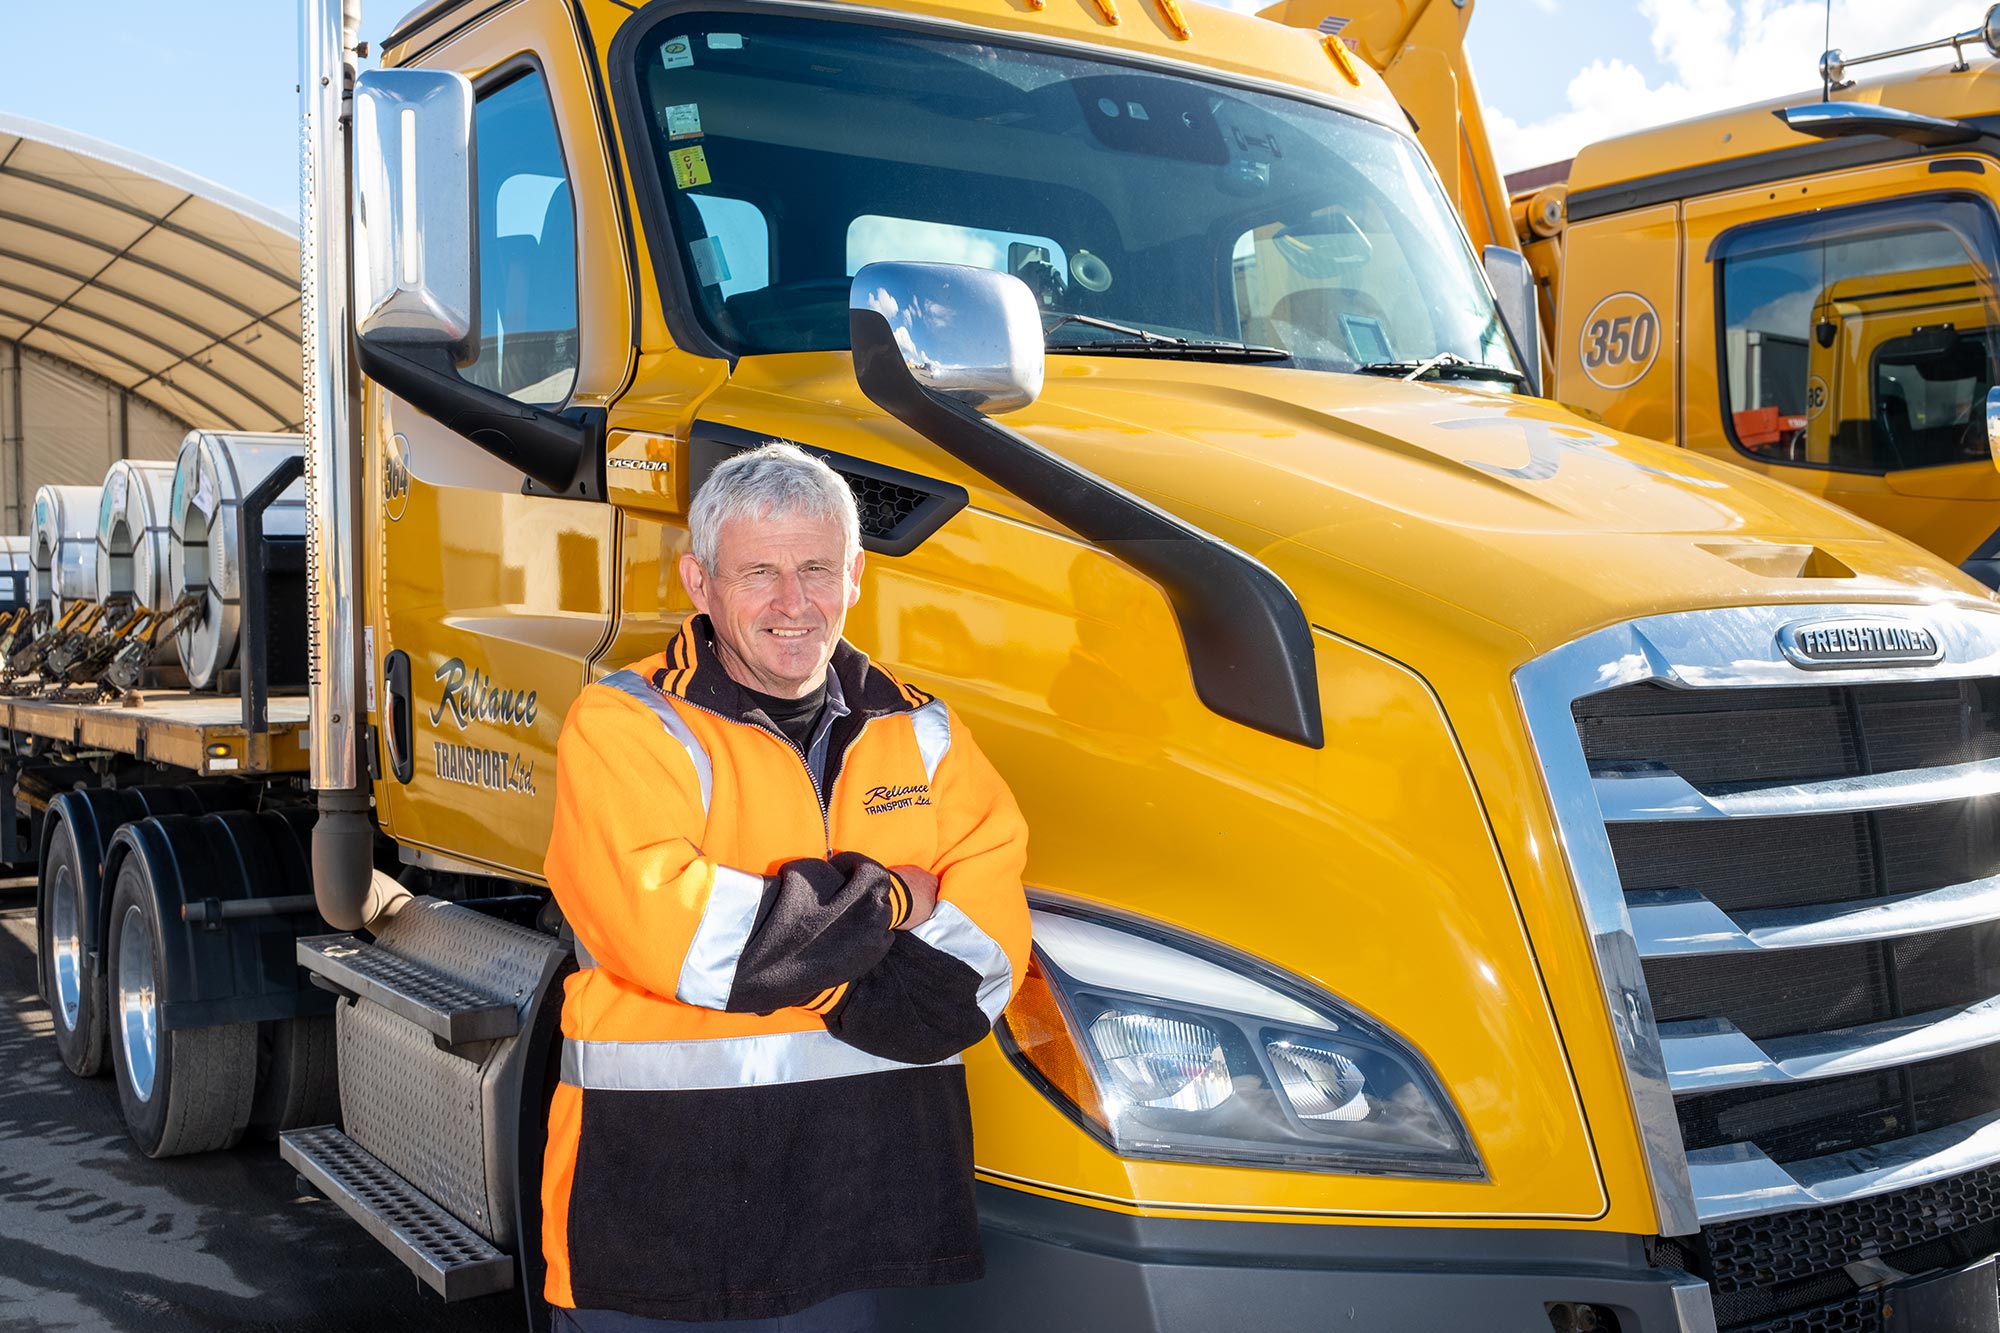 Reliance Transport owner Mark with his Freightliner Cascadia 